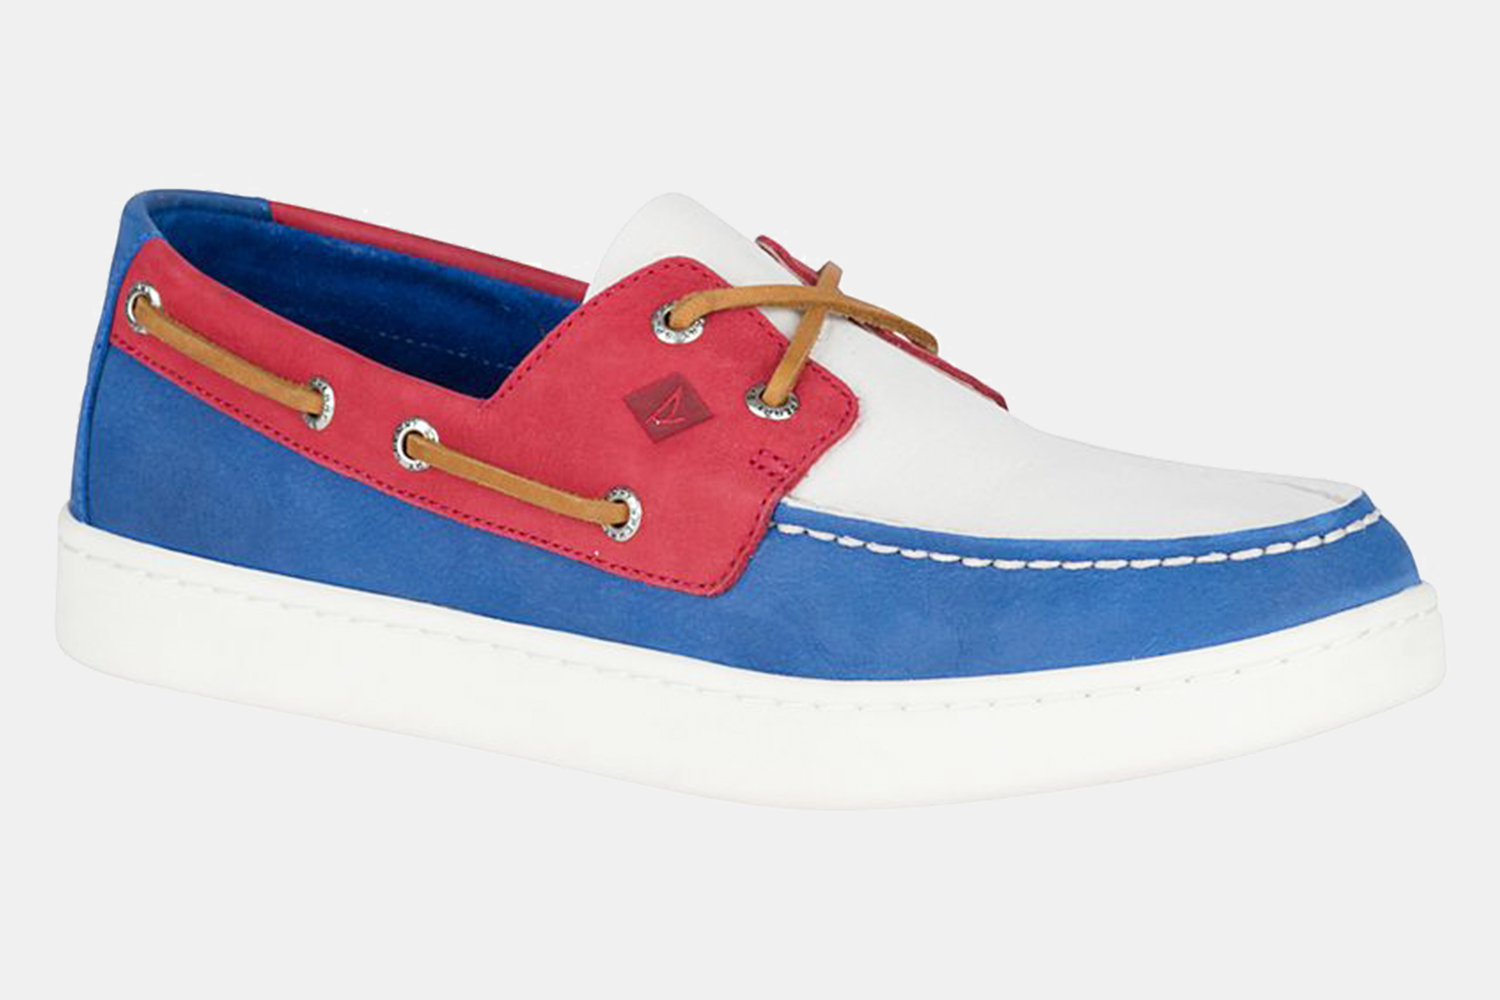 Sperry Cup Boat Shoe Sale